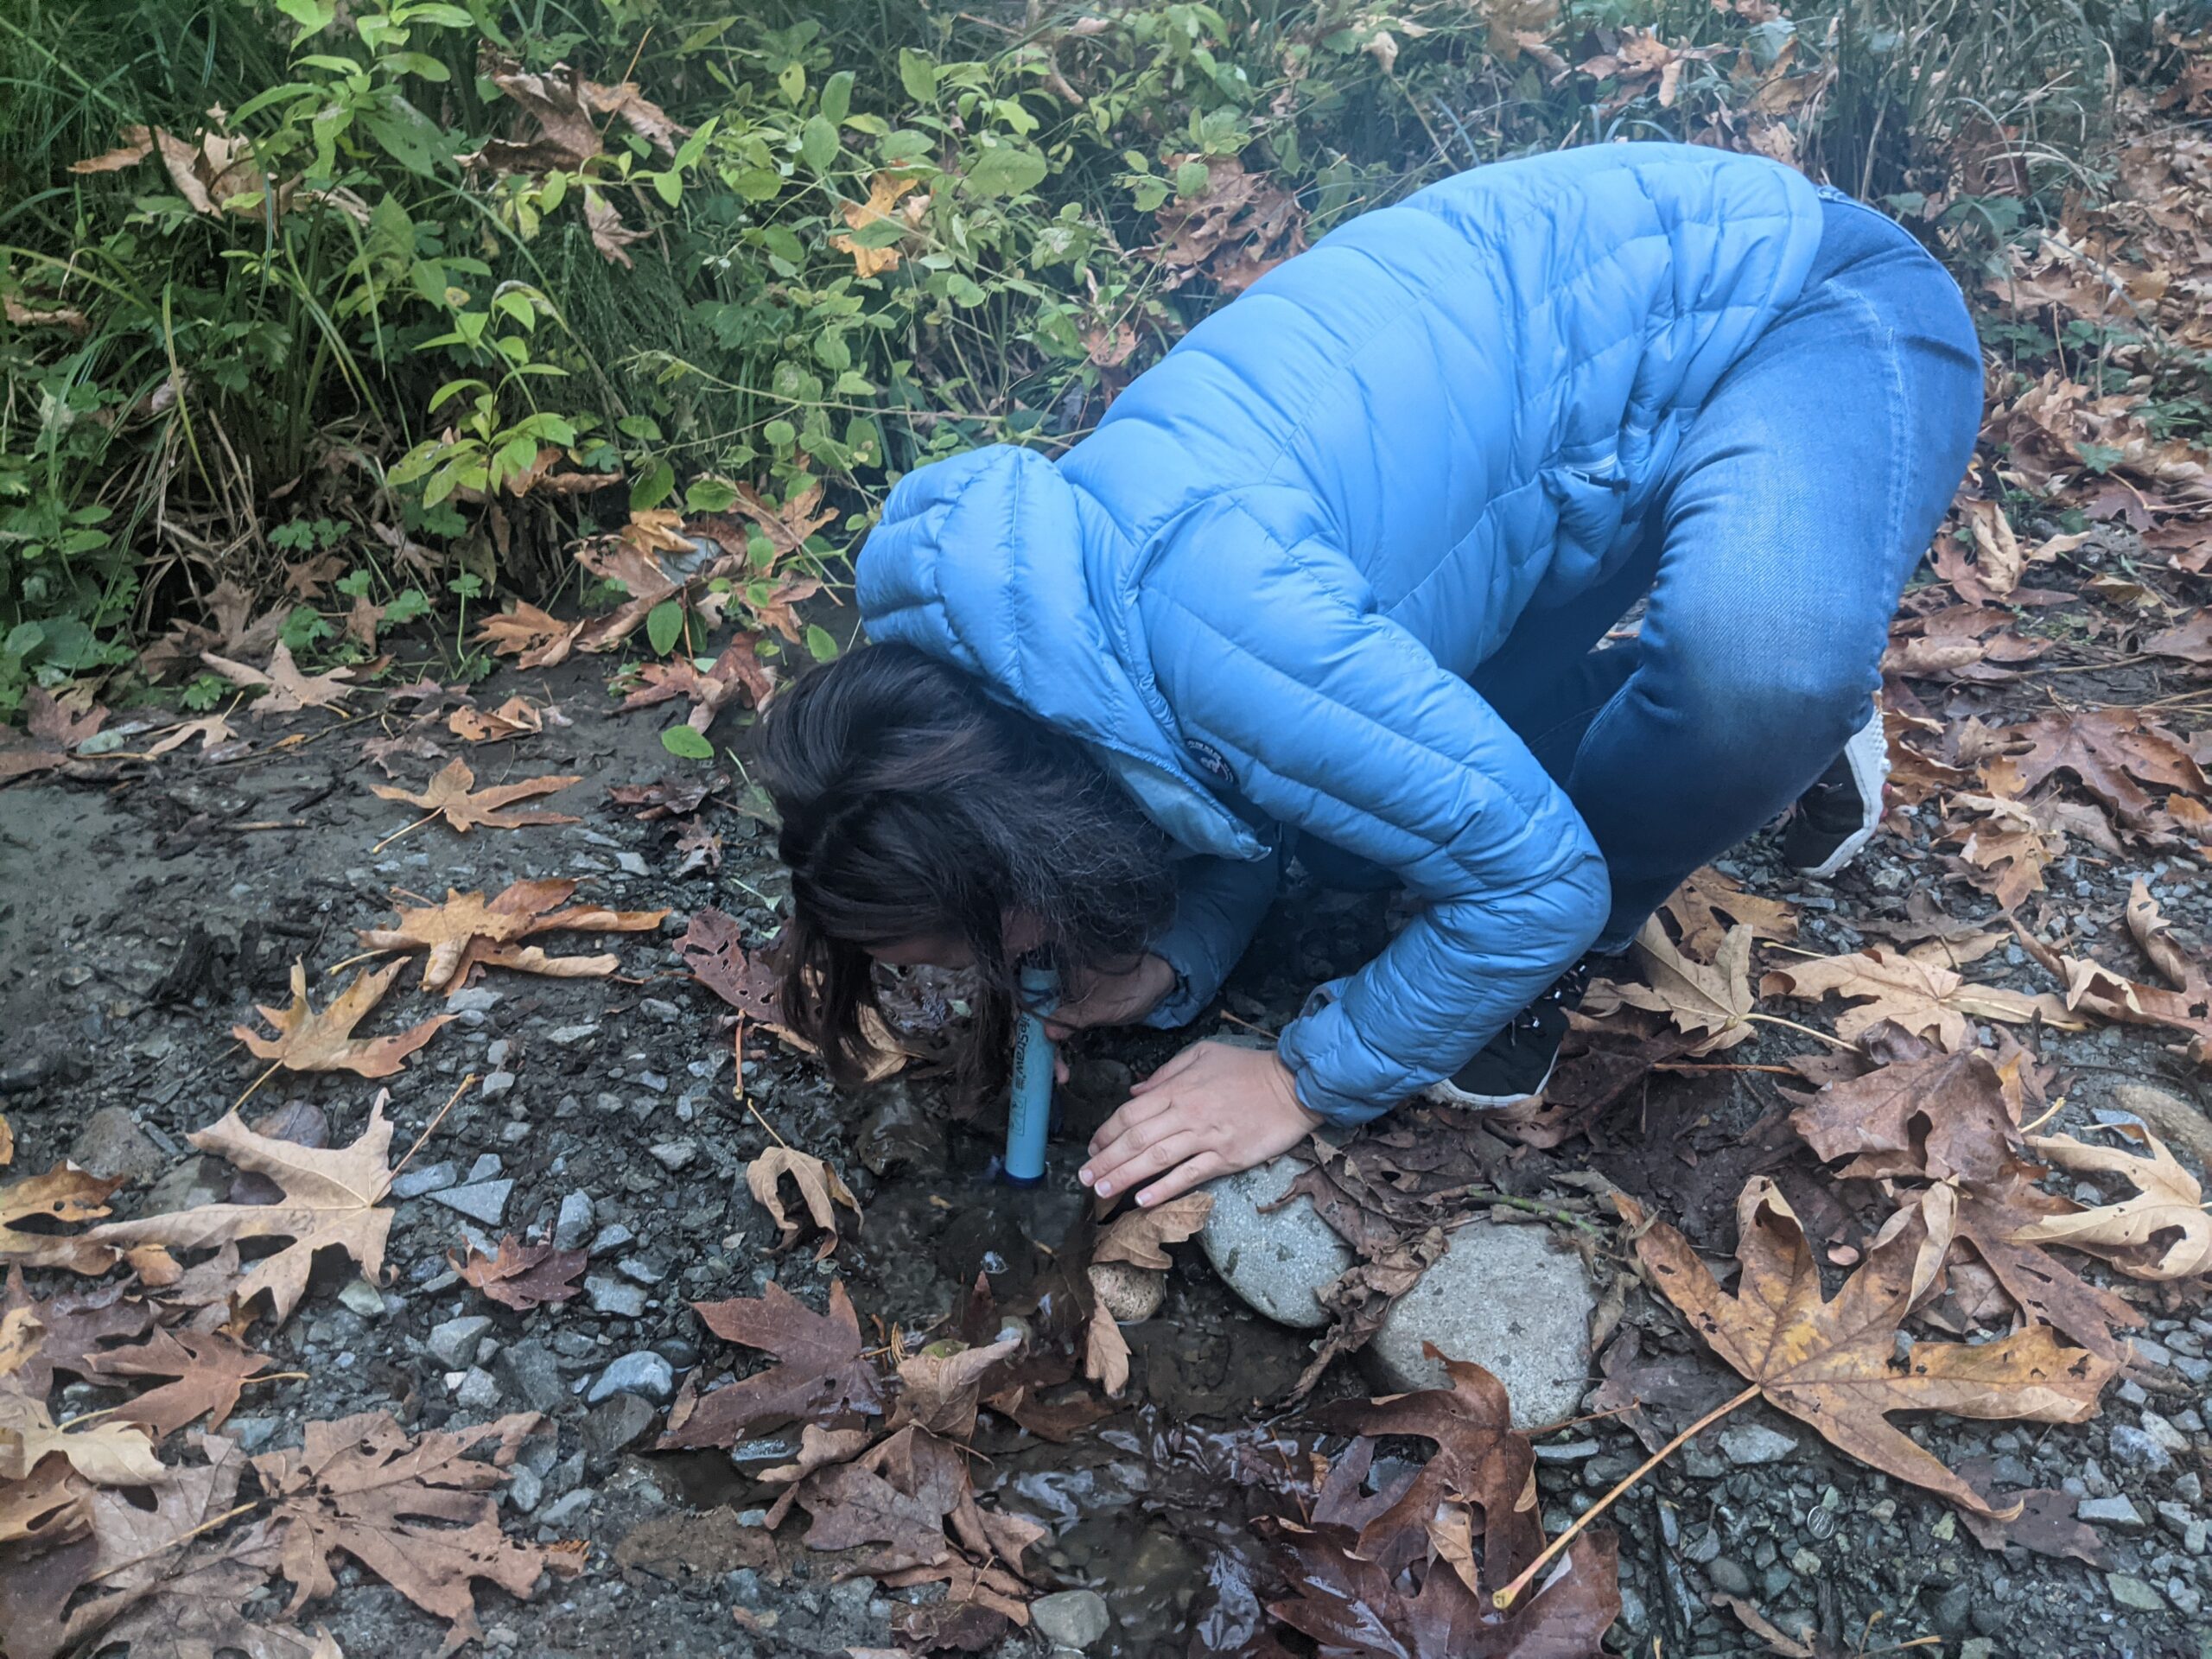 Using the LifeStraw to drink from a dirty puddle